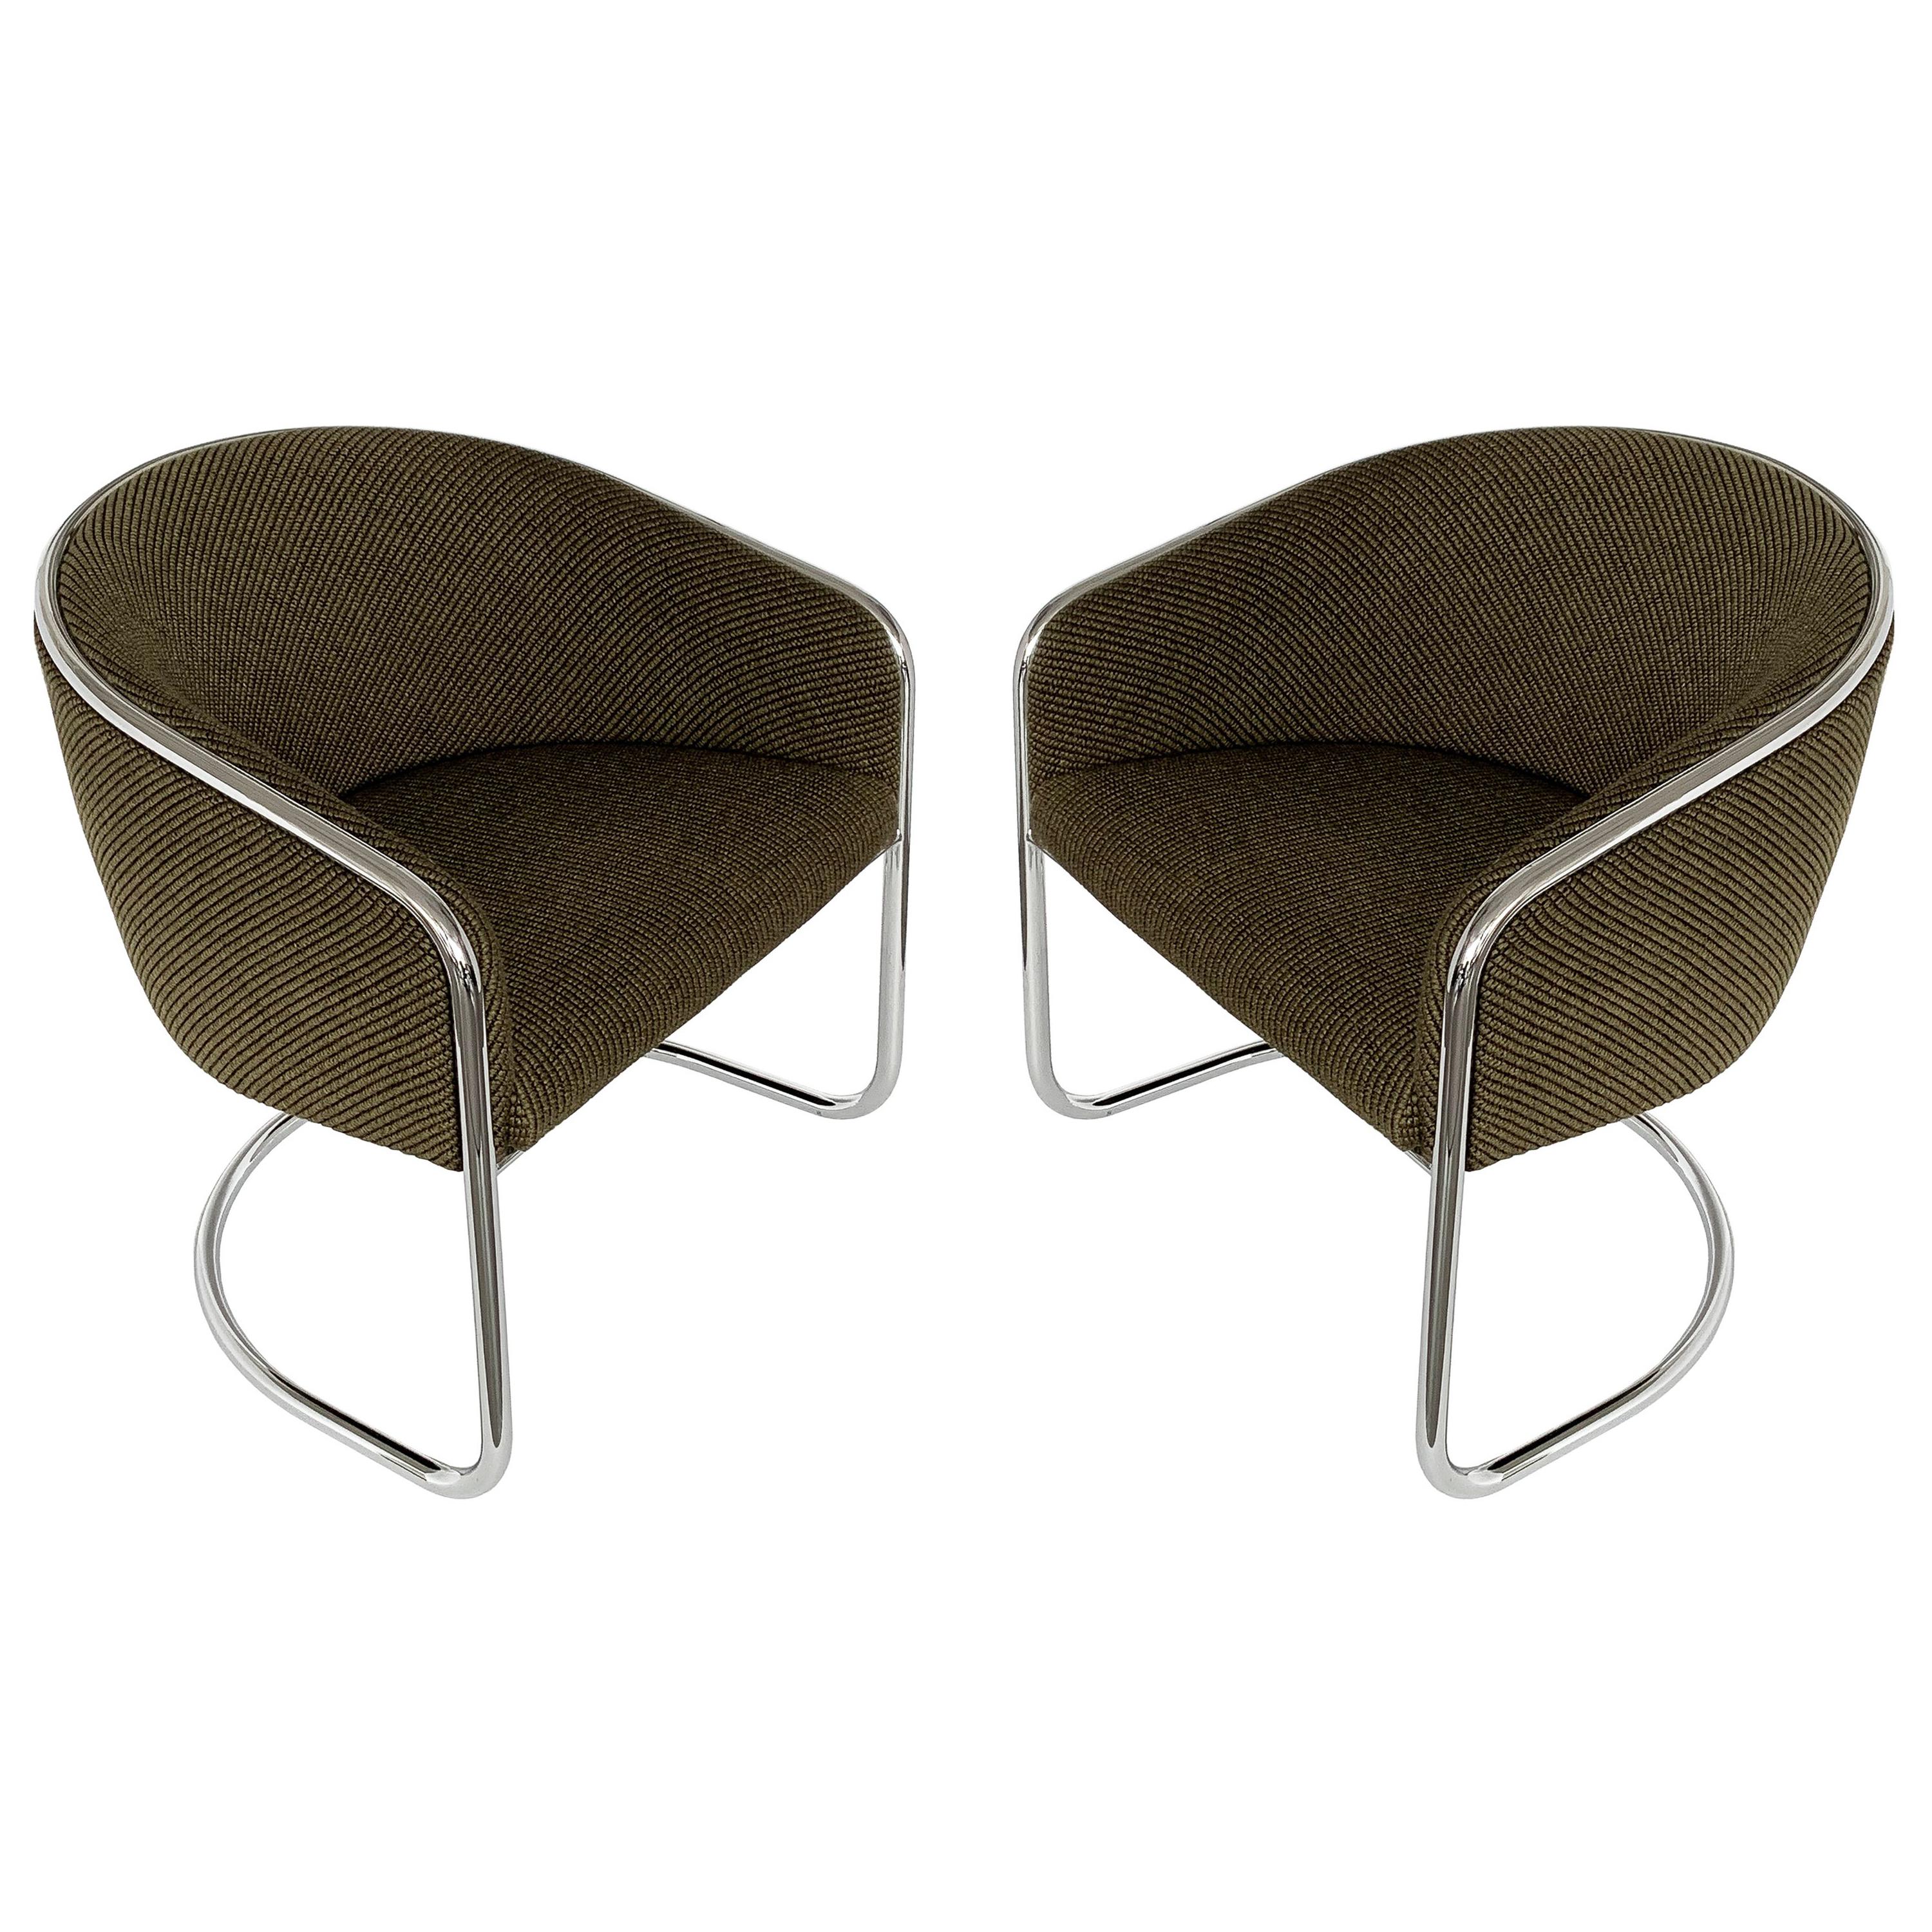 Pair of Tub Dining or Lounge Chairs by Joan Burgasser / Anton Lorenz for Thonet